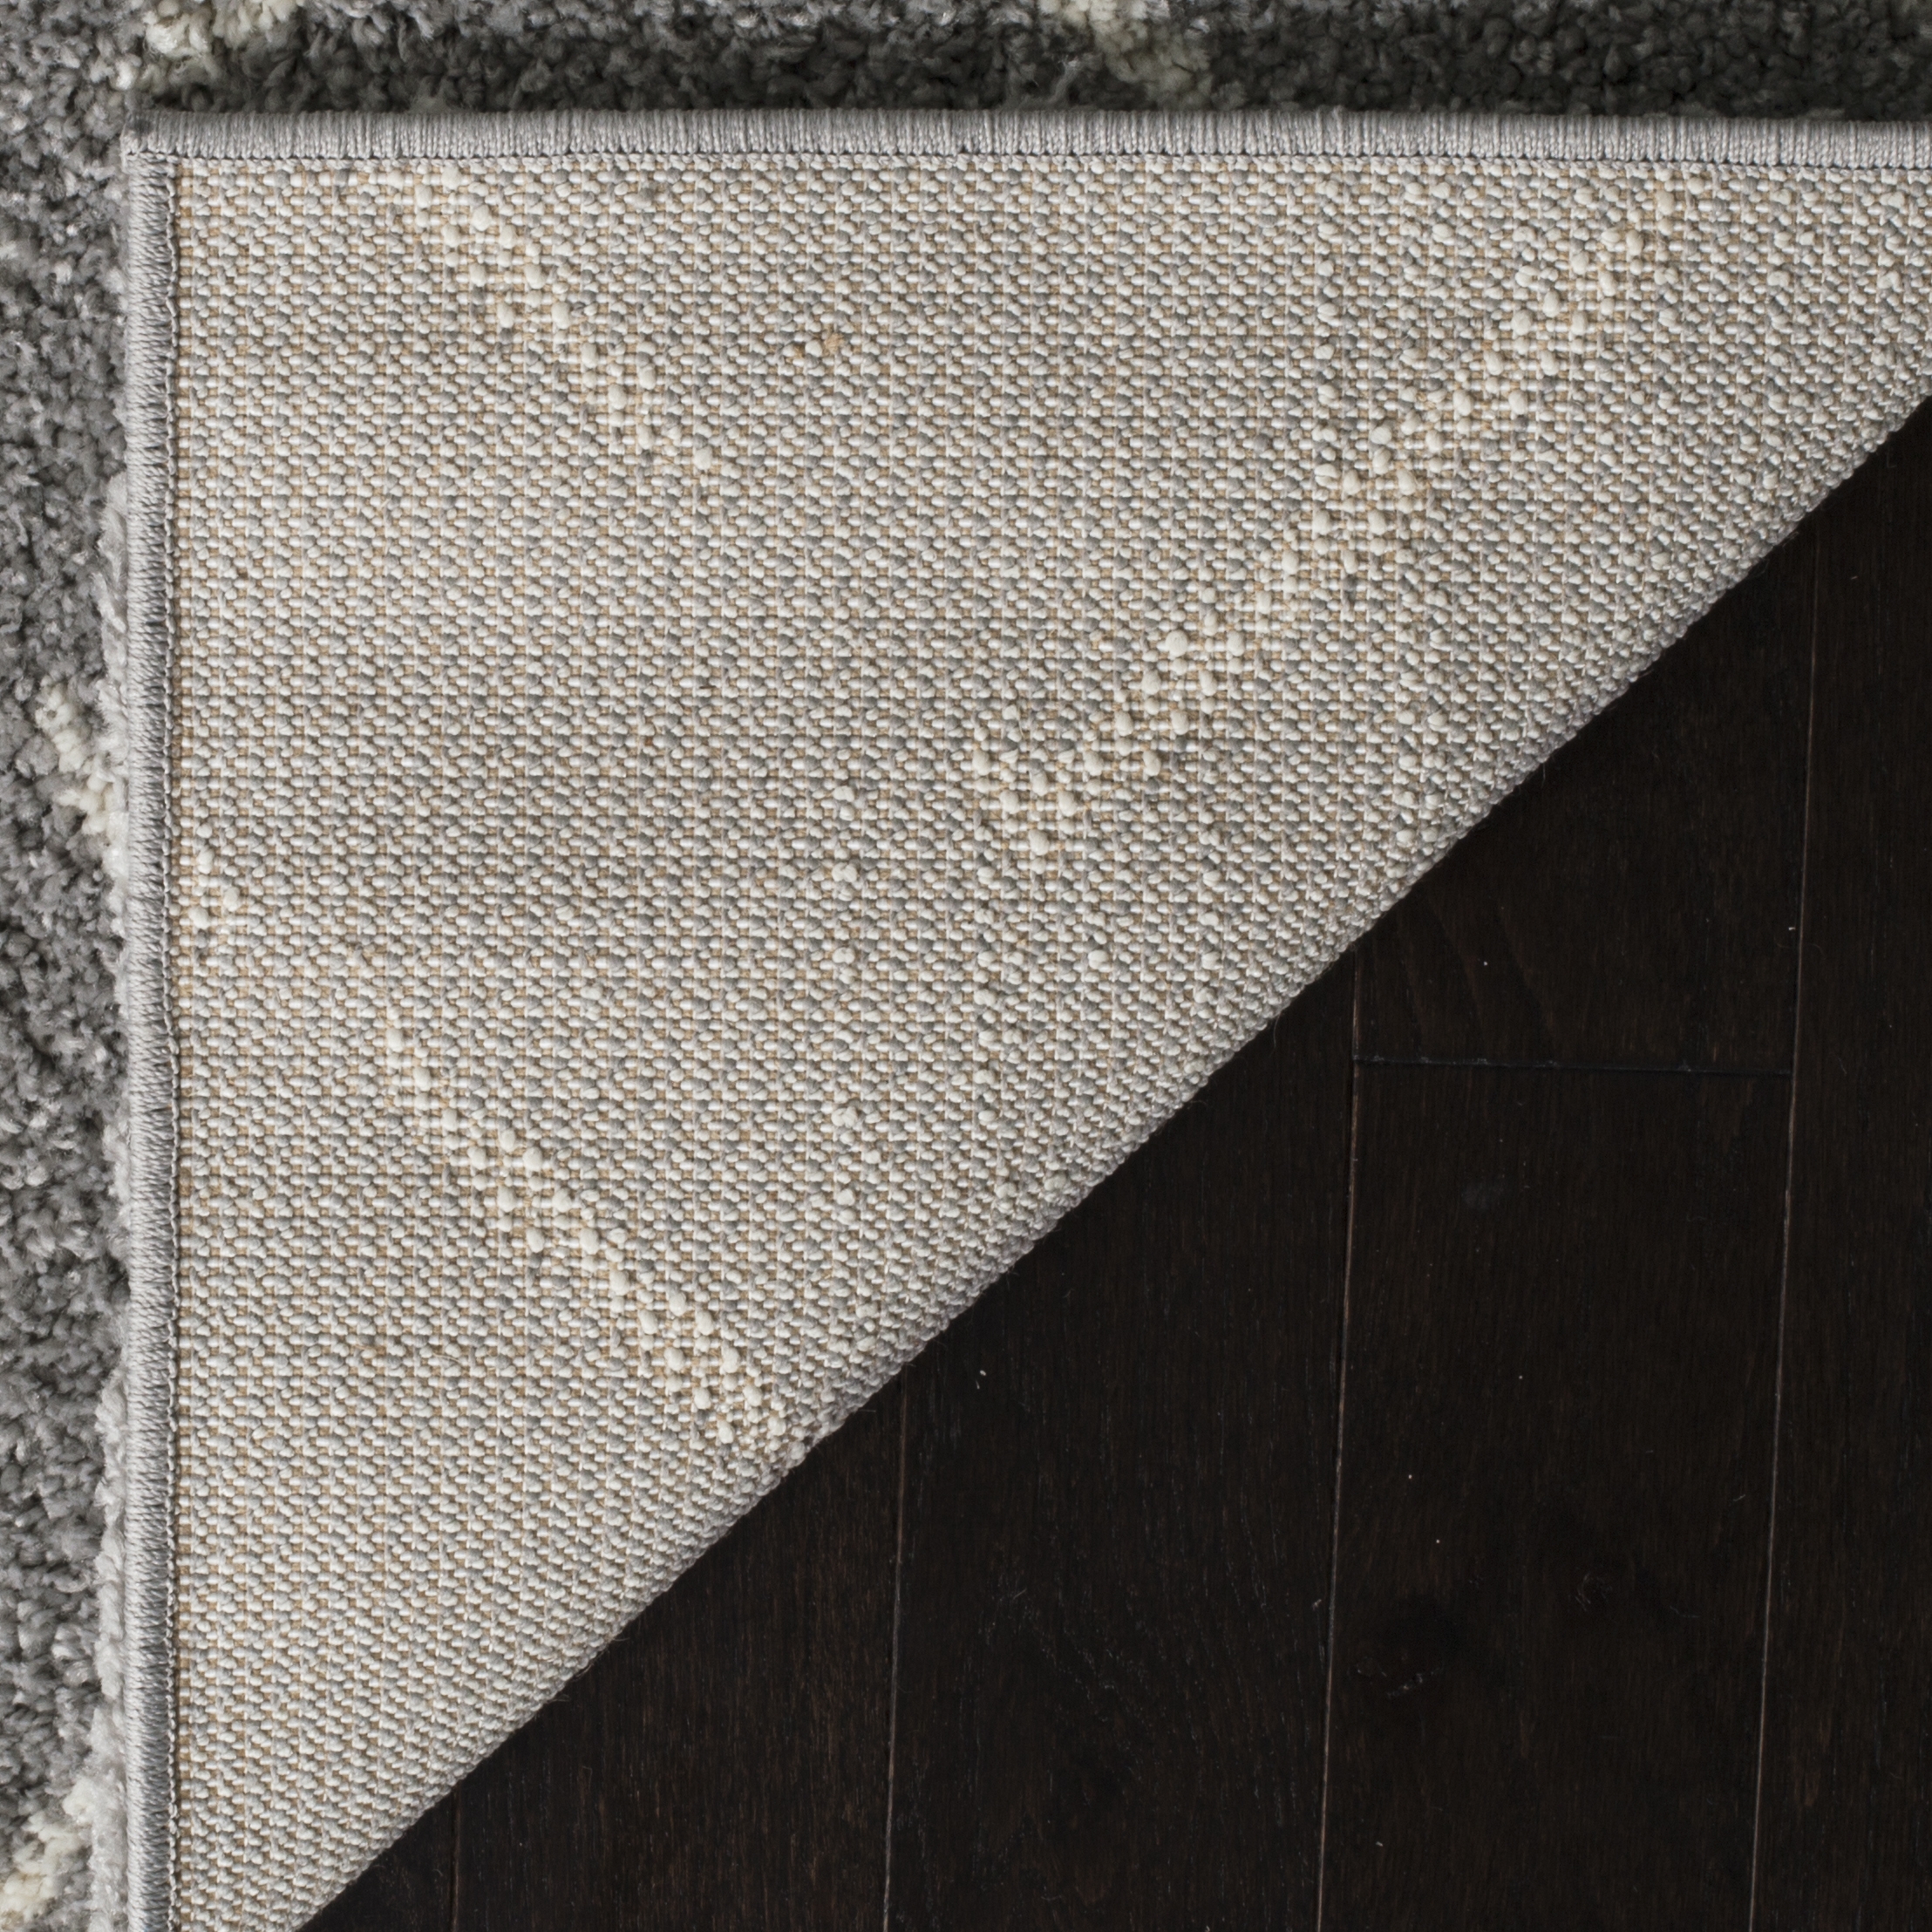 Safavieh Woven Area Rug, ASG743D, Grey/Ivory,  10' X 14' - Image 2